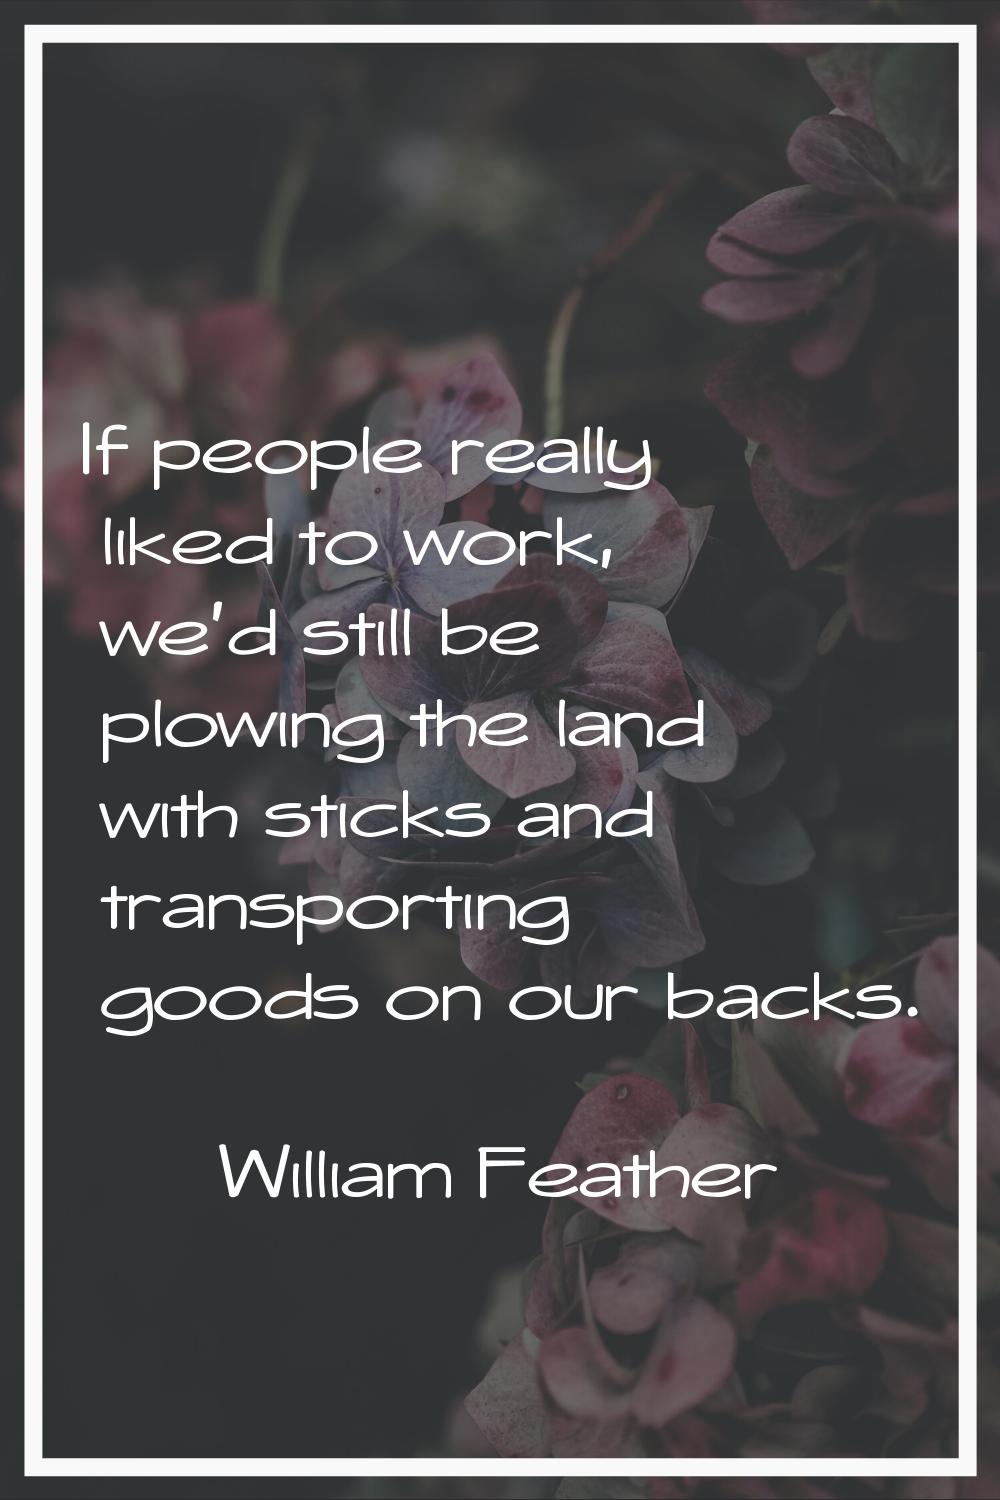 If people really liked to work, we'd still be plowing the land with sticks and transporting goods o